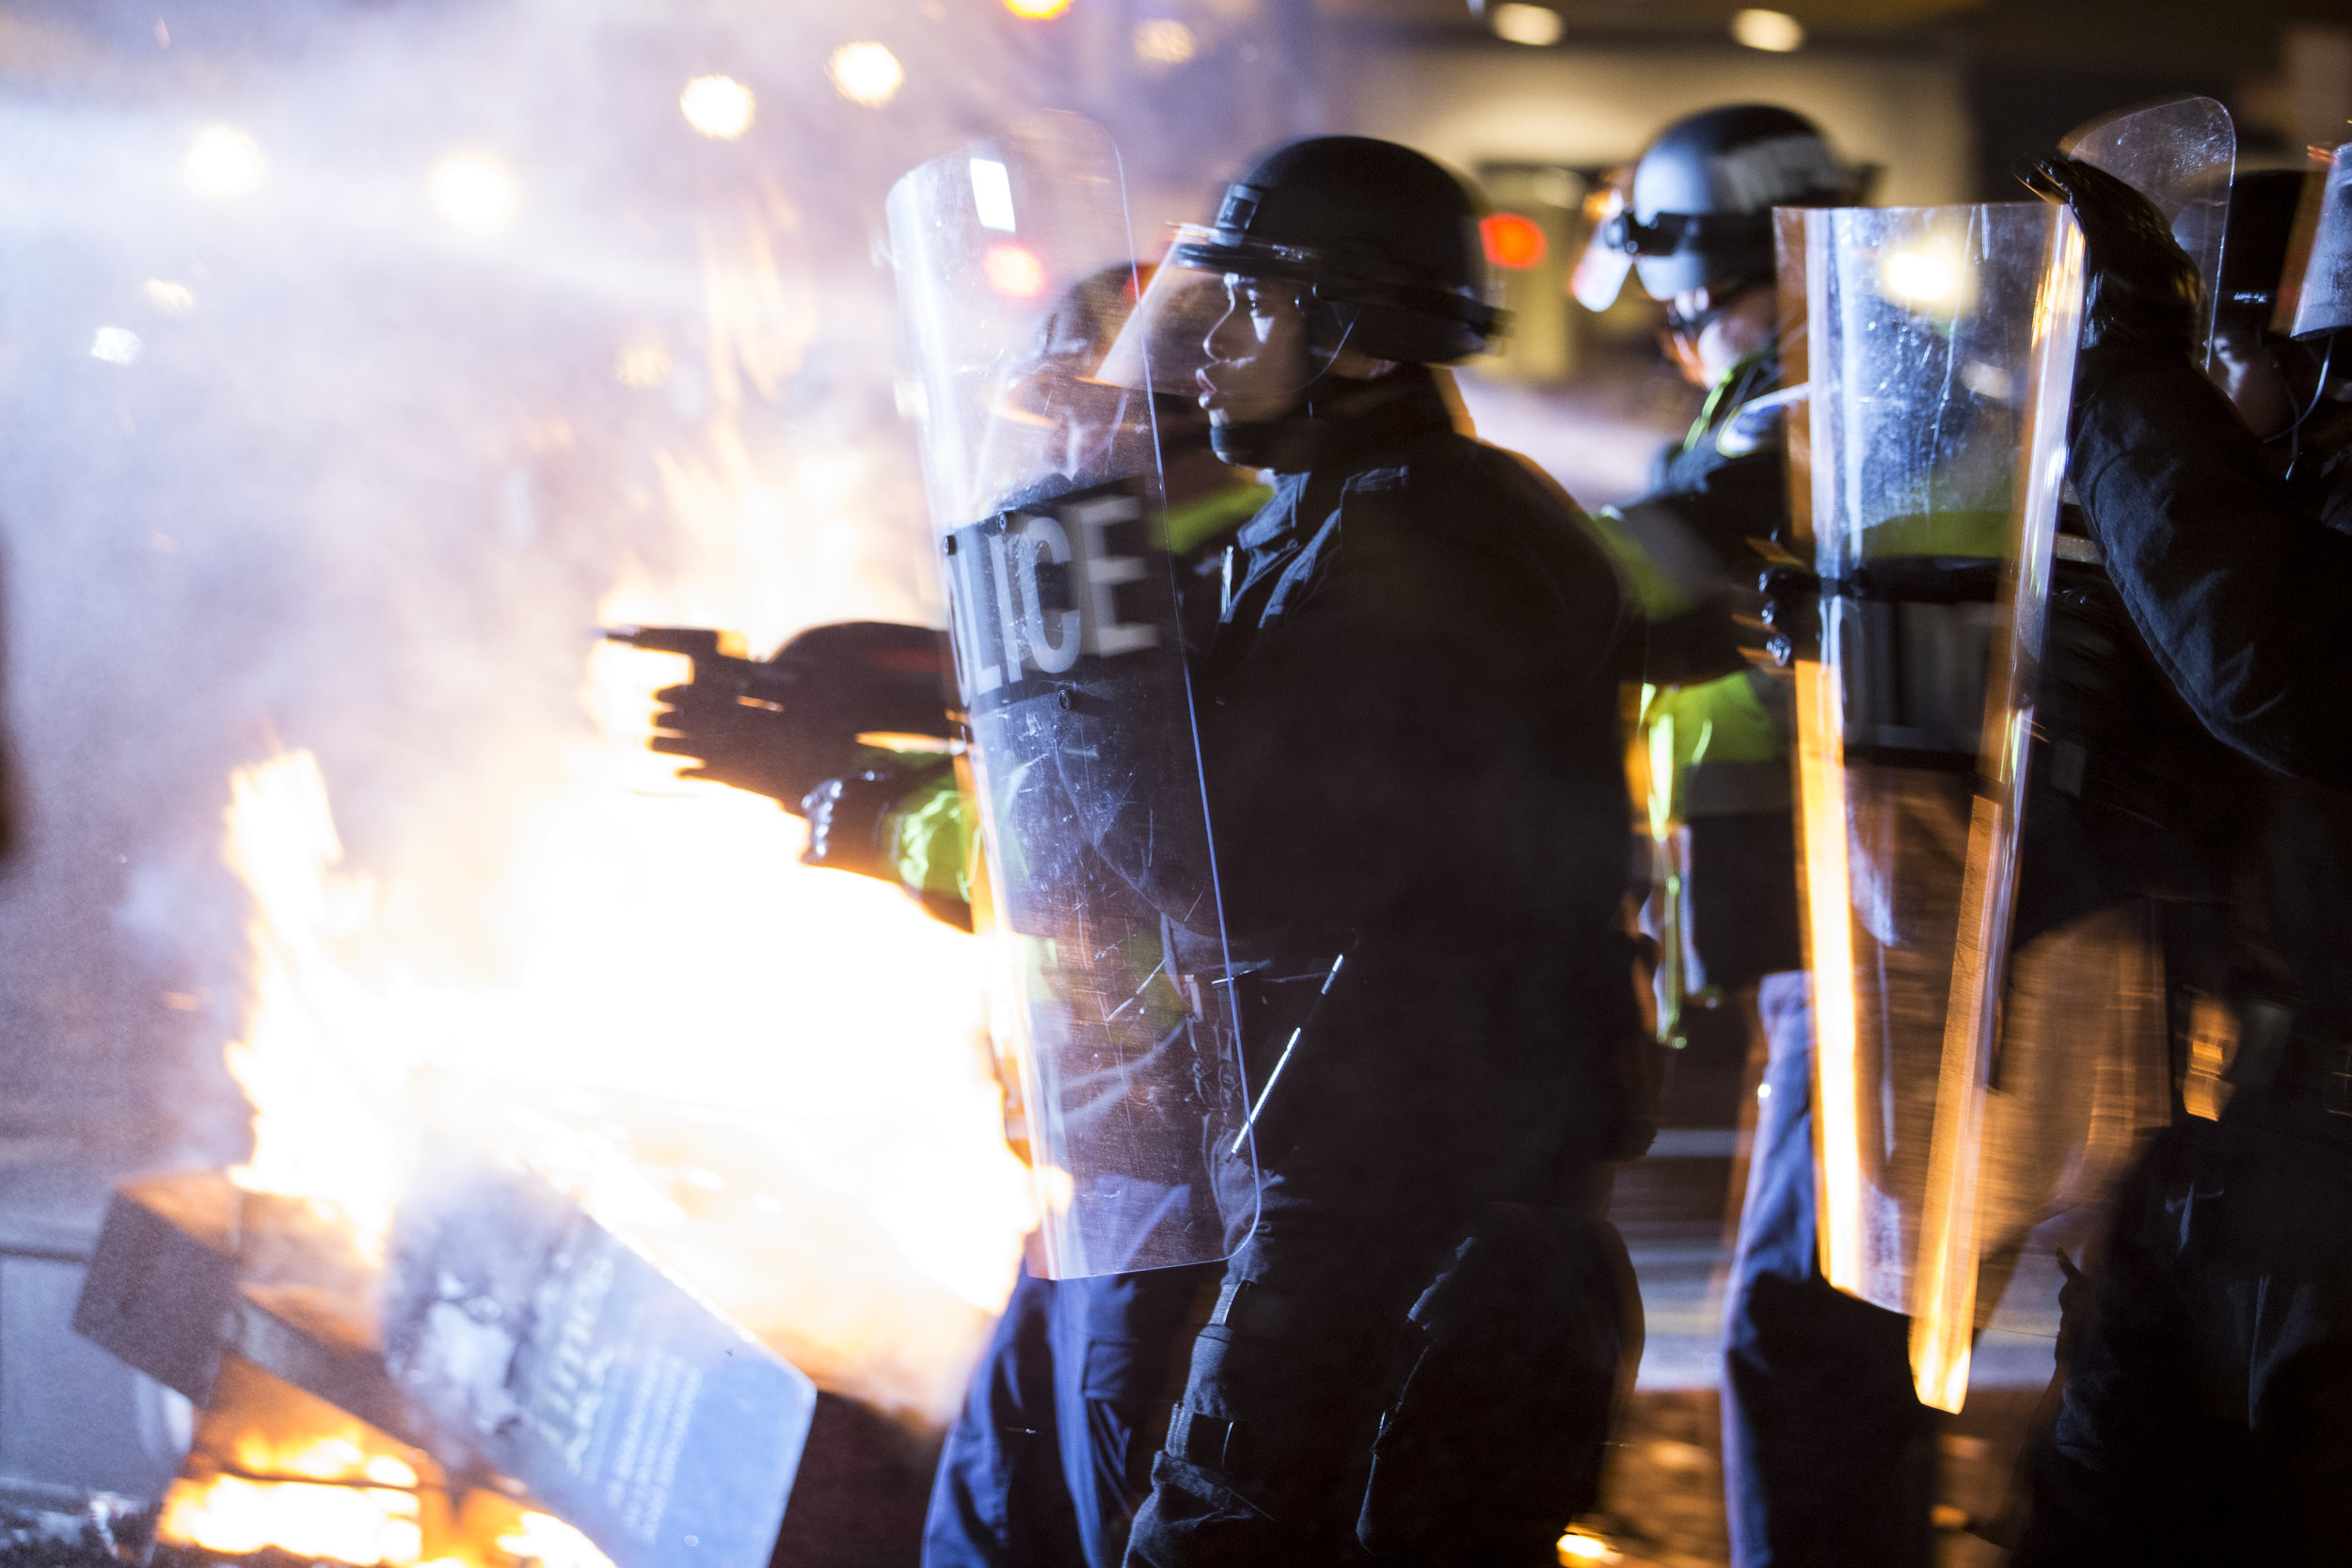  Riot police pepper spray protesters on K St. and 14th St. after the protesters had been building a large fire in response to President Trump's inauguration on January 20, 2017.&nbsp; 